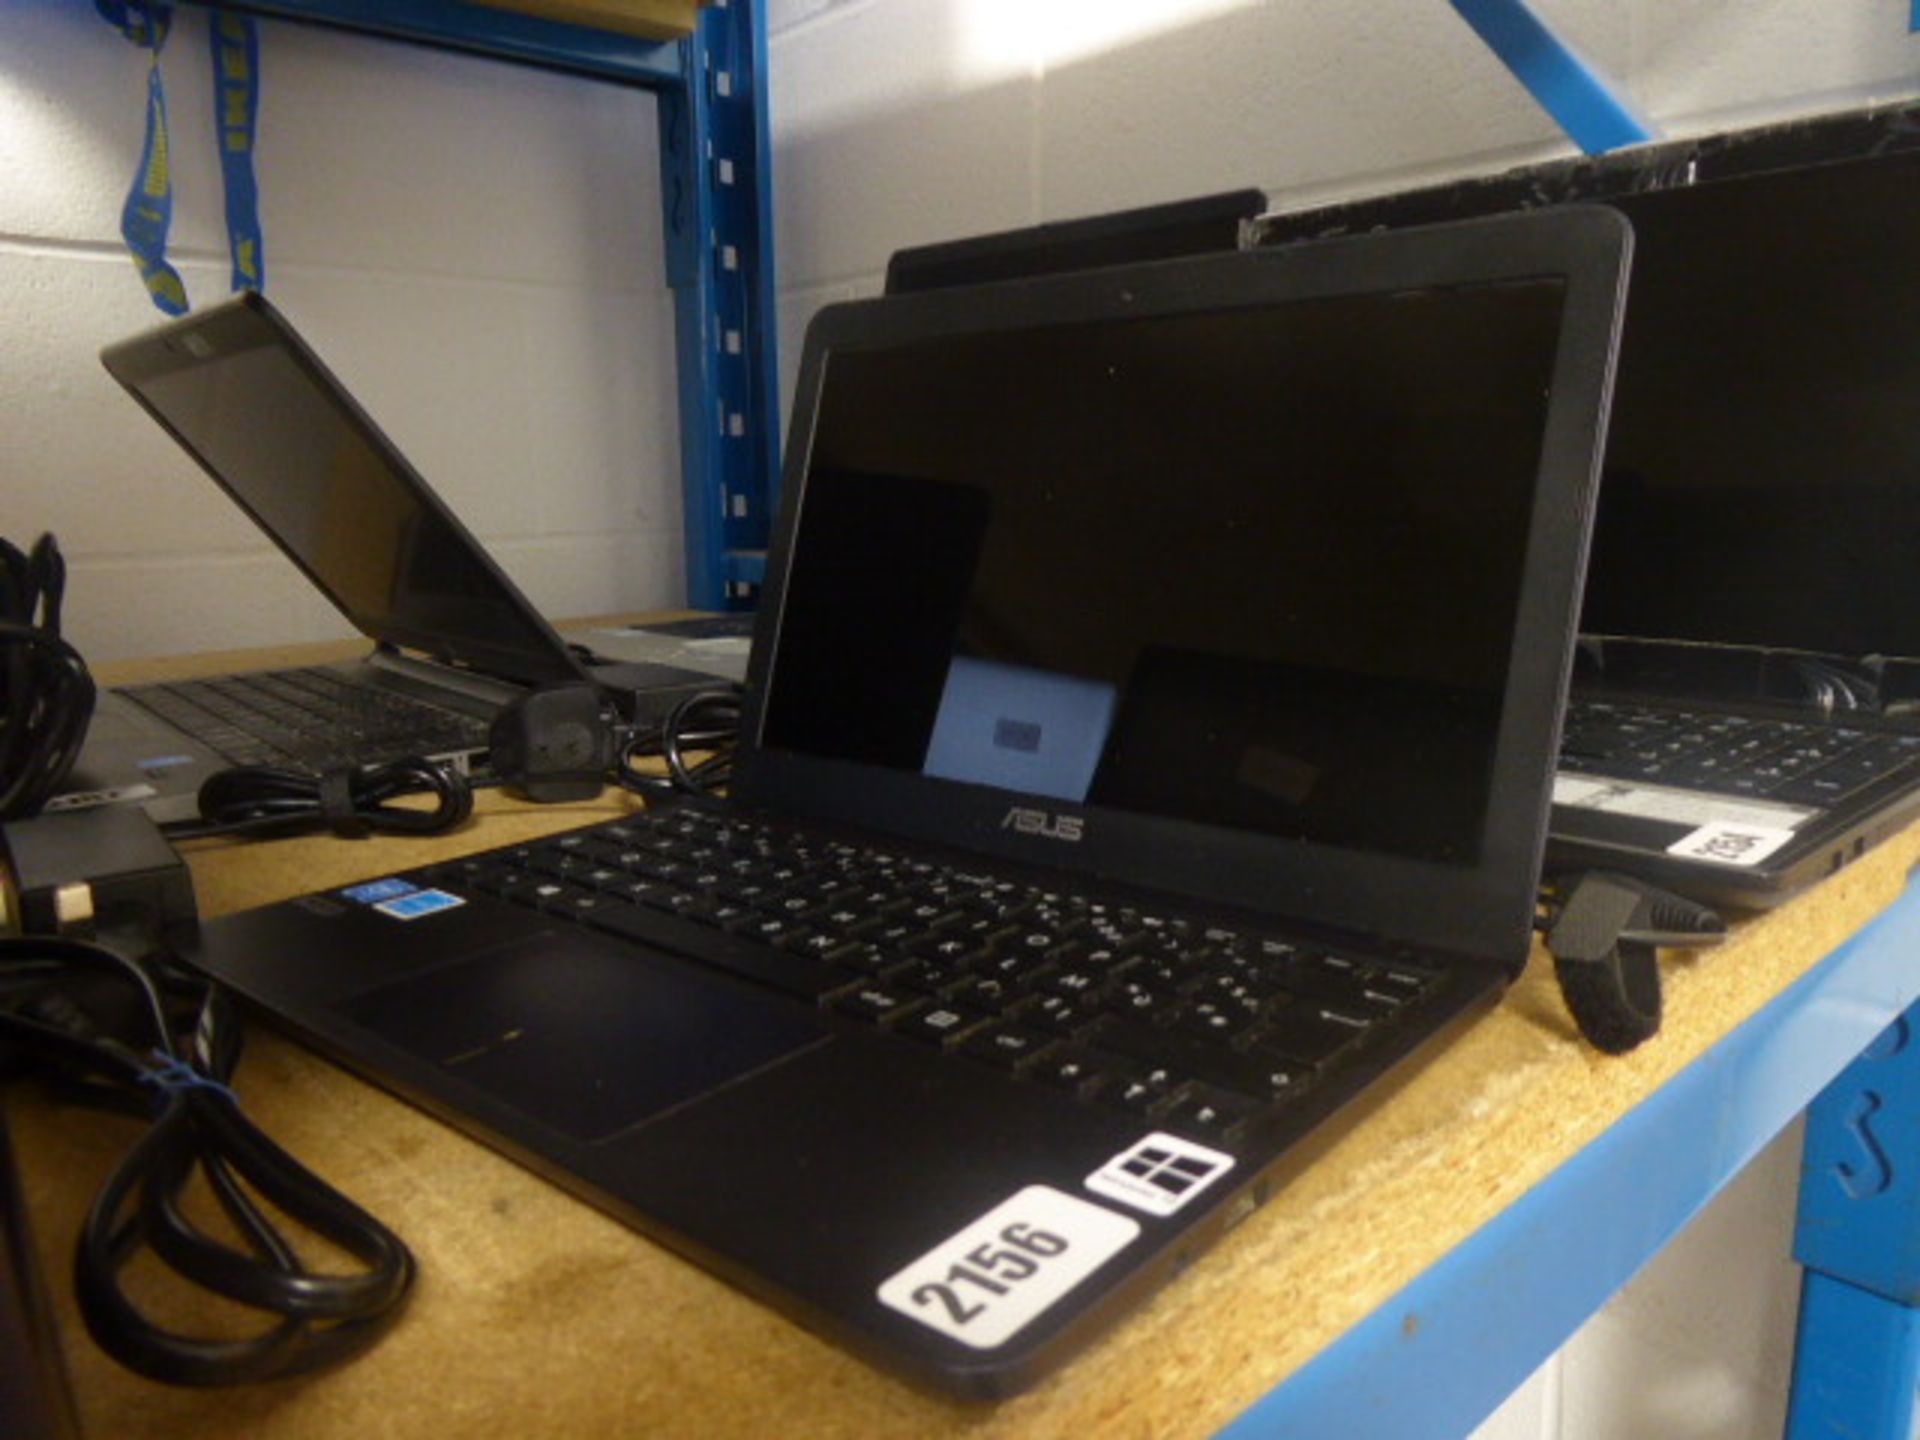 Asus laptop, model no. X206H Netbook PC with power supply